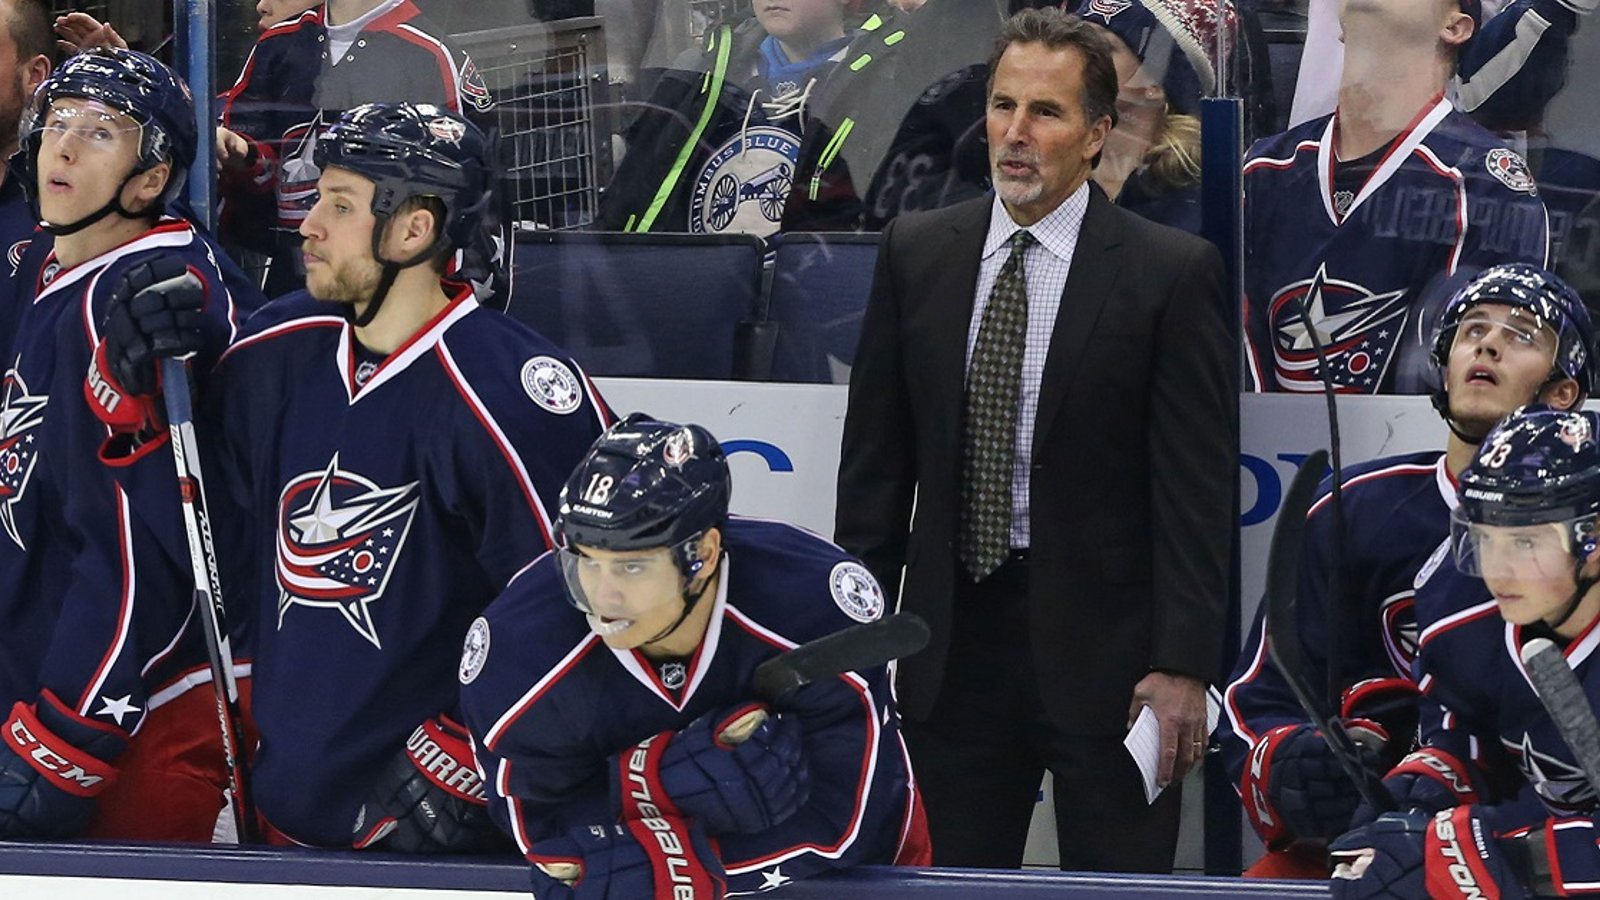 Tortorella makes another controversial move, Team USA gets shut out.